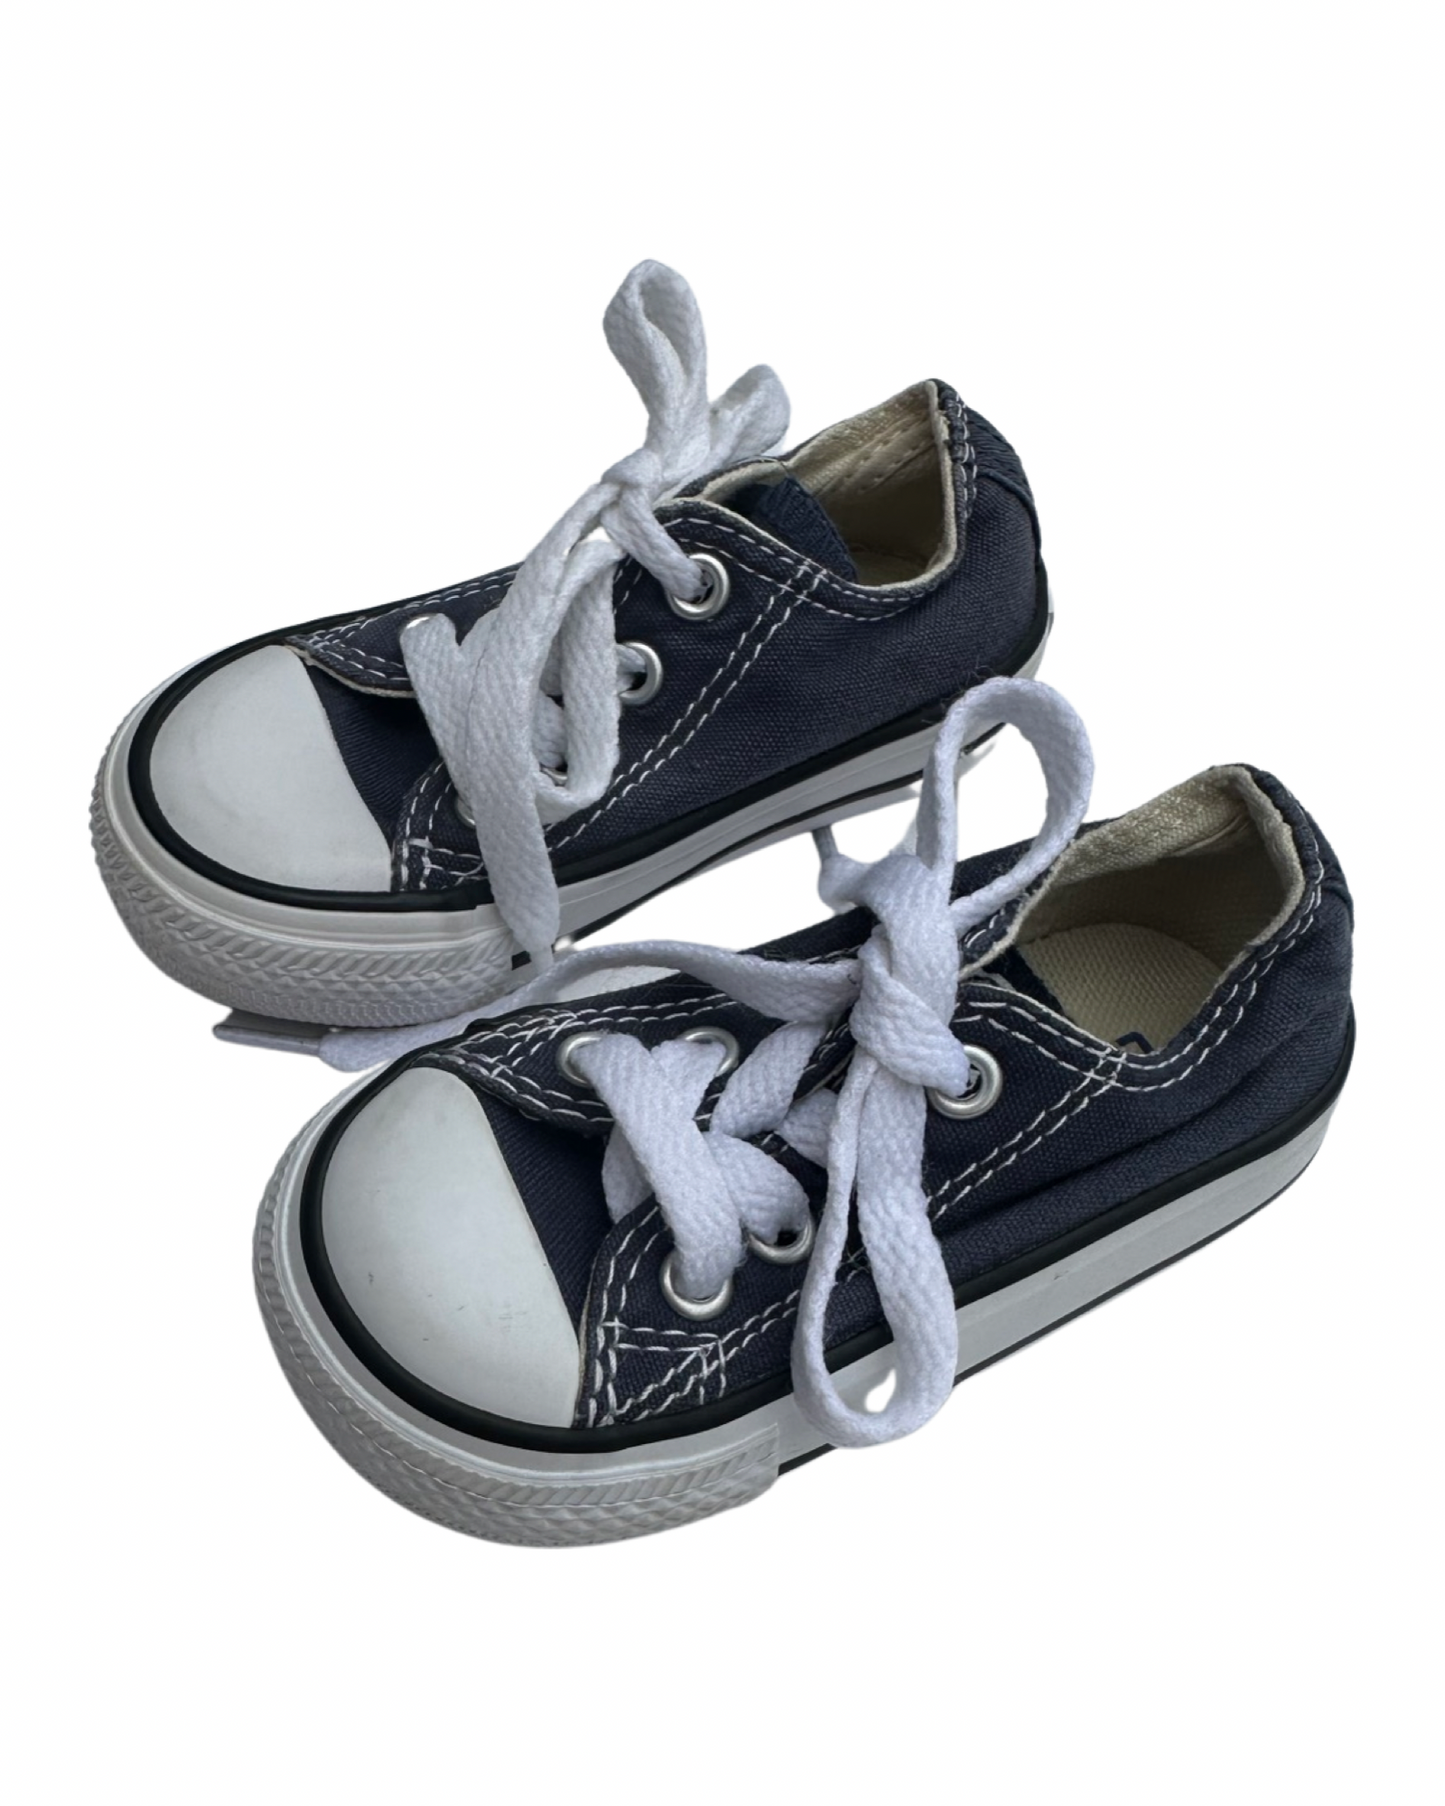 Converse Chuck Taylor classic low lace up infant trainers in navy(UK4/EU20)